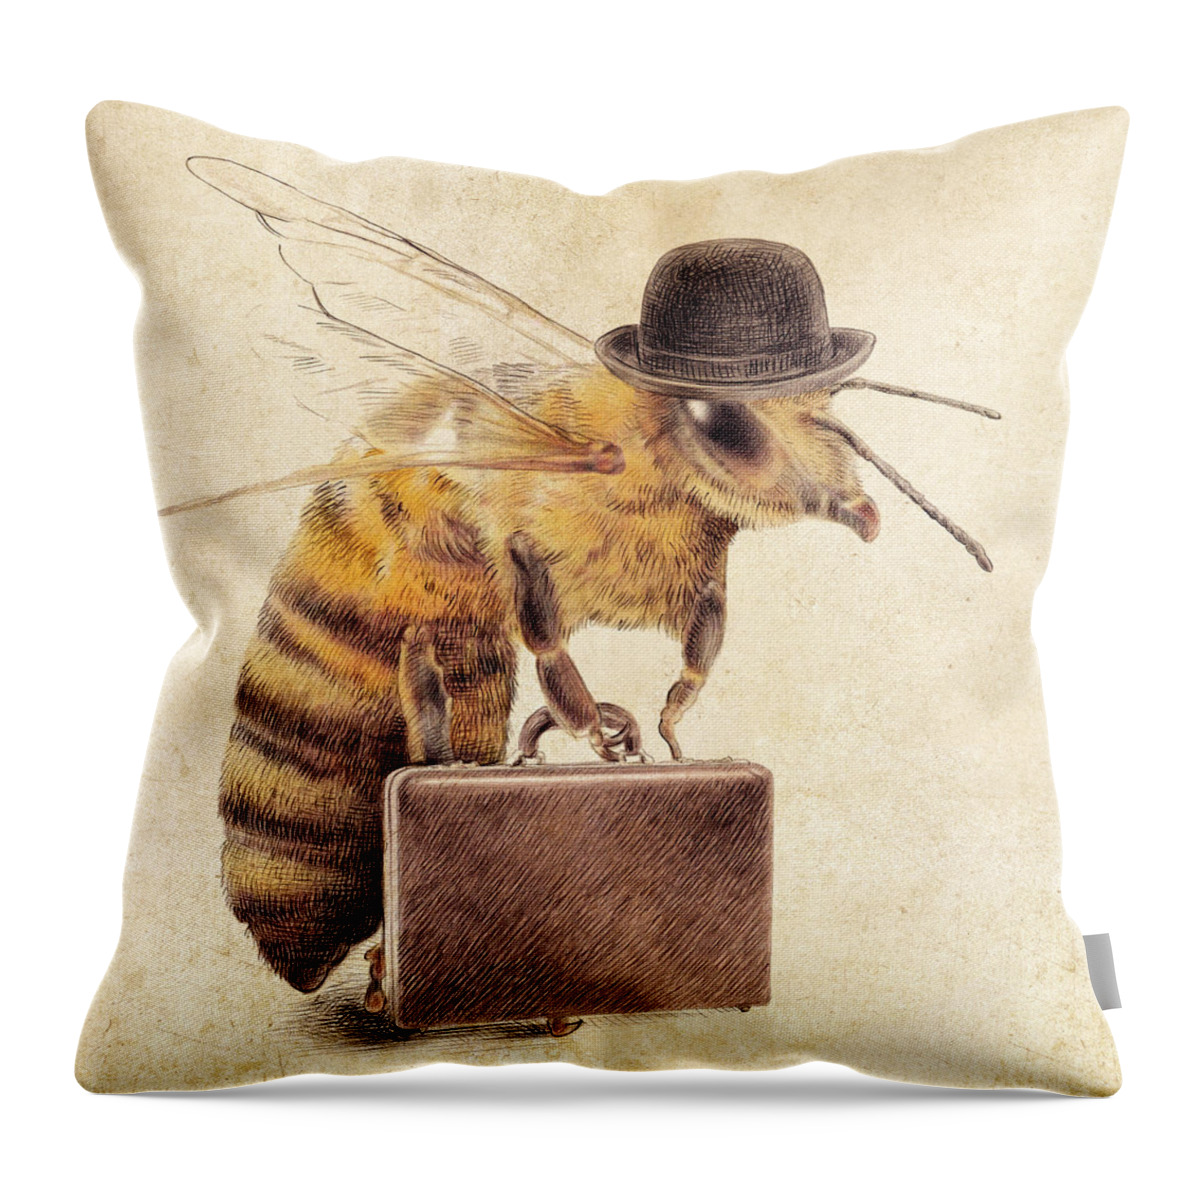 Bee Throw Pillow featuring the drawing Worker Bee by Eric Fan